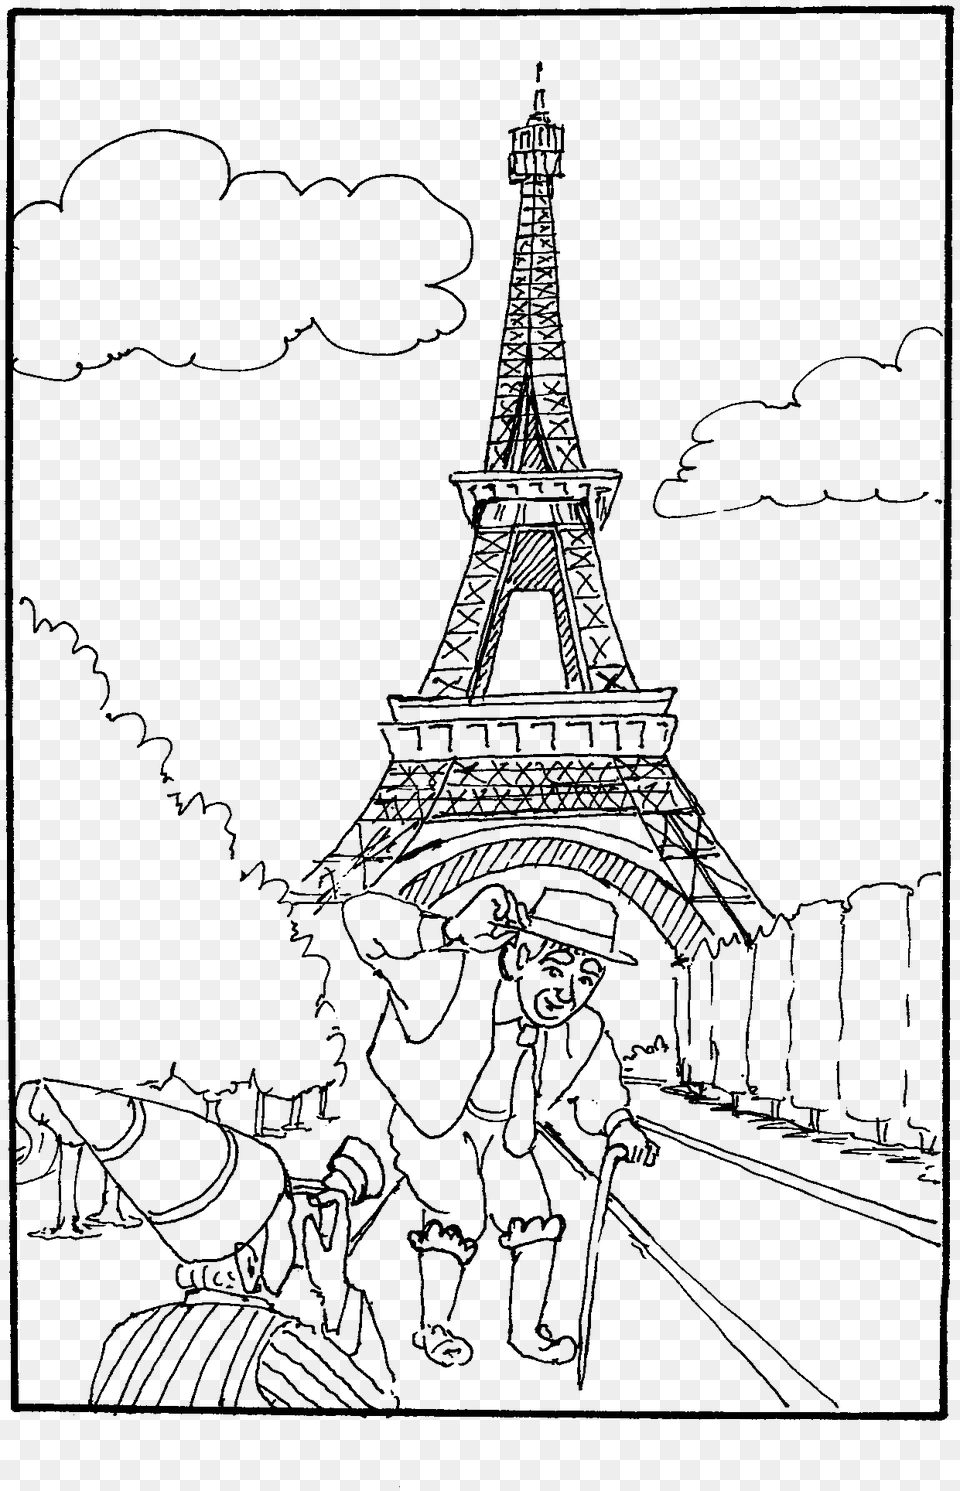 Eiffel Tower Silhouette Image French Art Coloring Pages, Architecture, Building, Spire, Chandelier Free Transparent Png